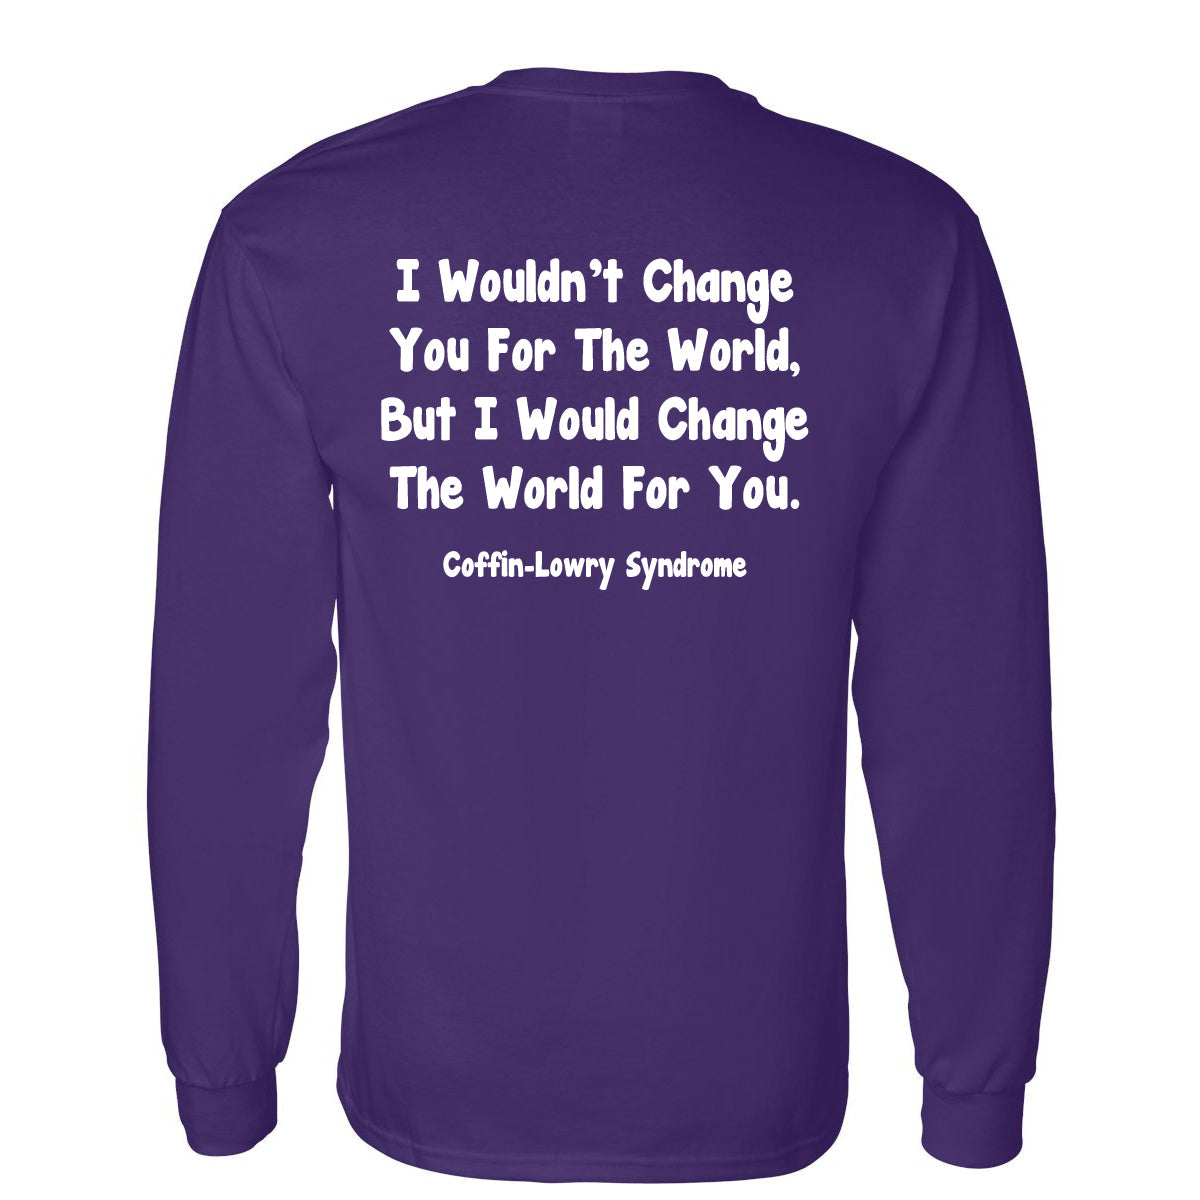 Coffin-Lowry Syndrome T-Shirts (YOUTH LONG SLEEVE)